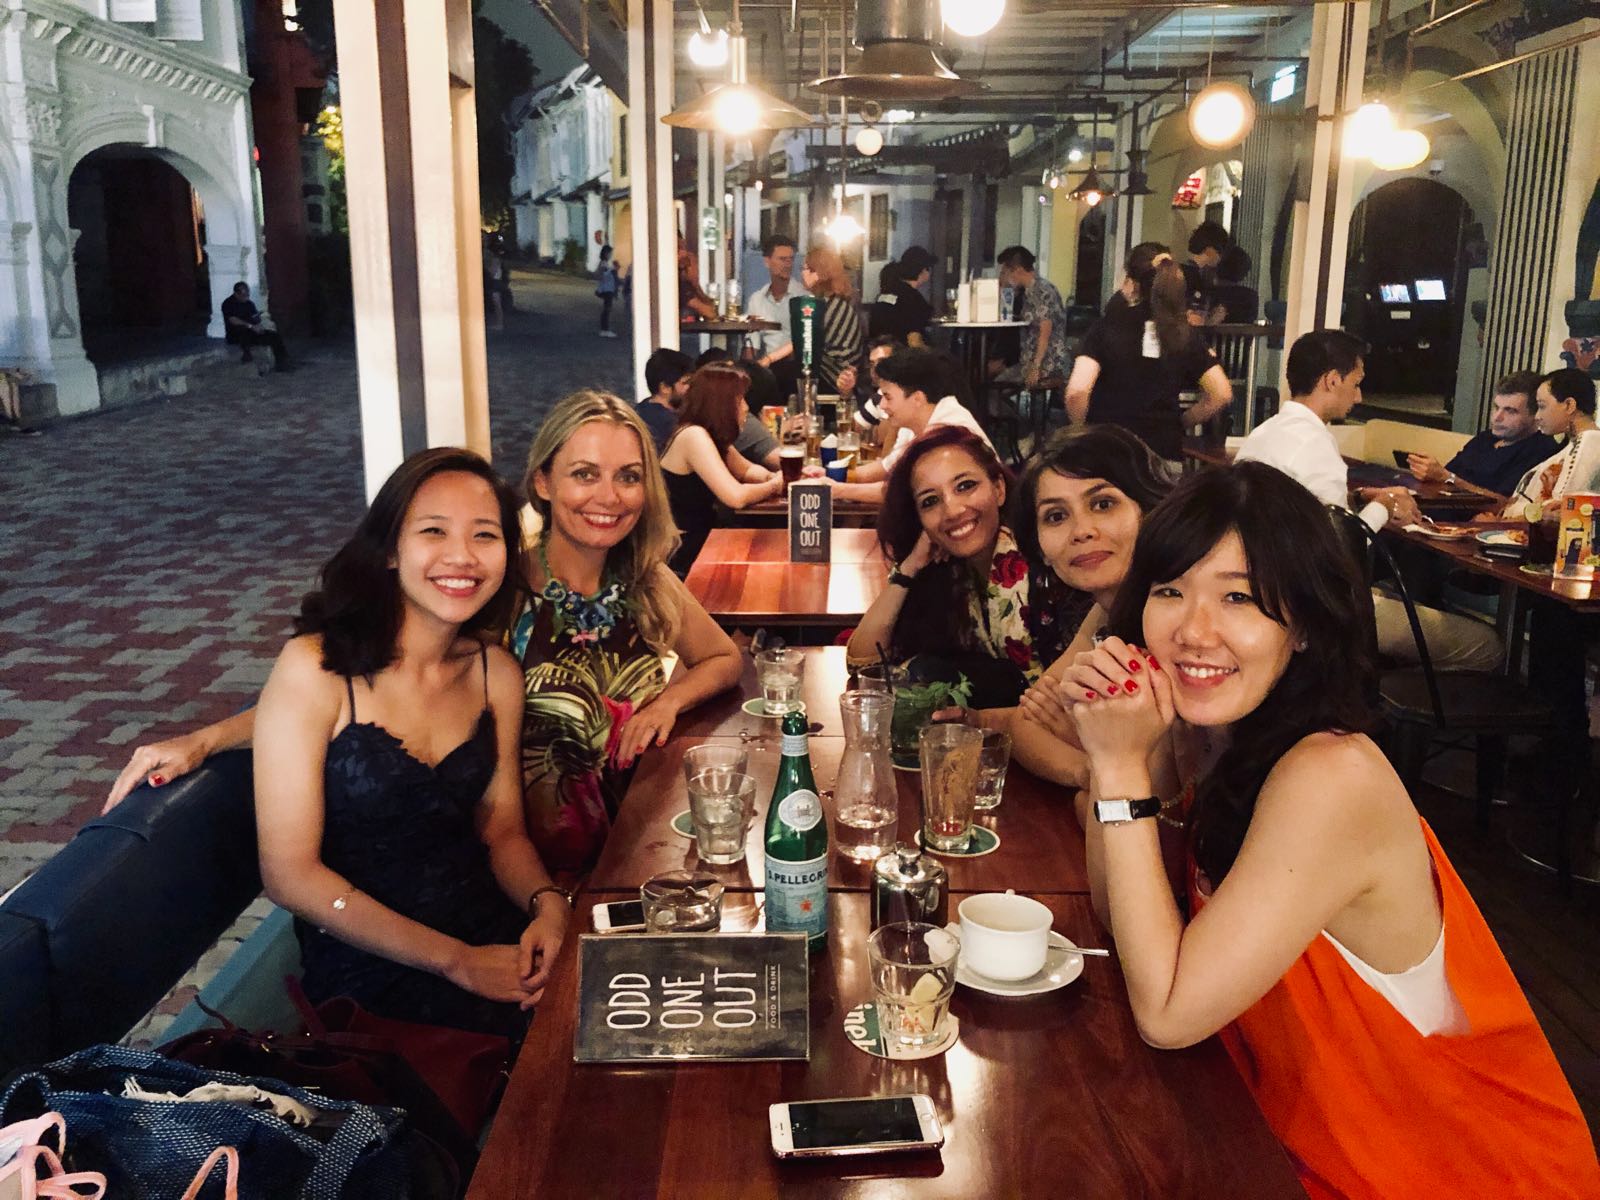  The nightcap with some of the co-founders of Women in Art, Singapore. From left: Beverly Hiong, Mamakan, Debasmitha Dasgupta, Madina Khamitova and Jolie Ow.  